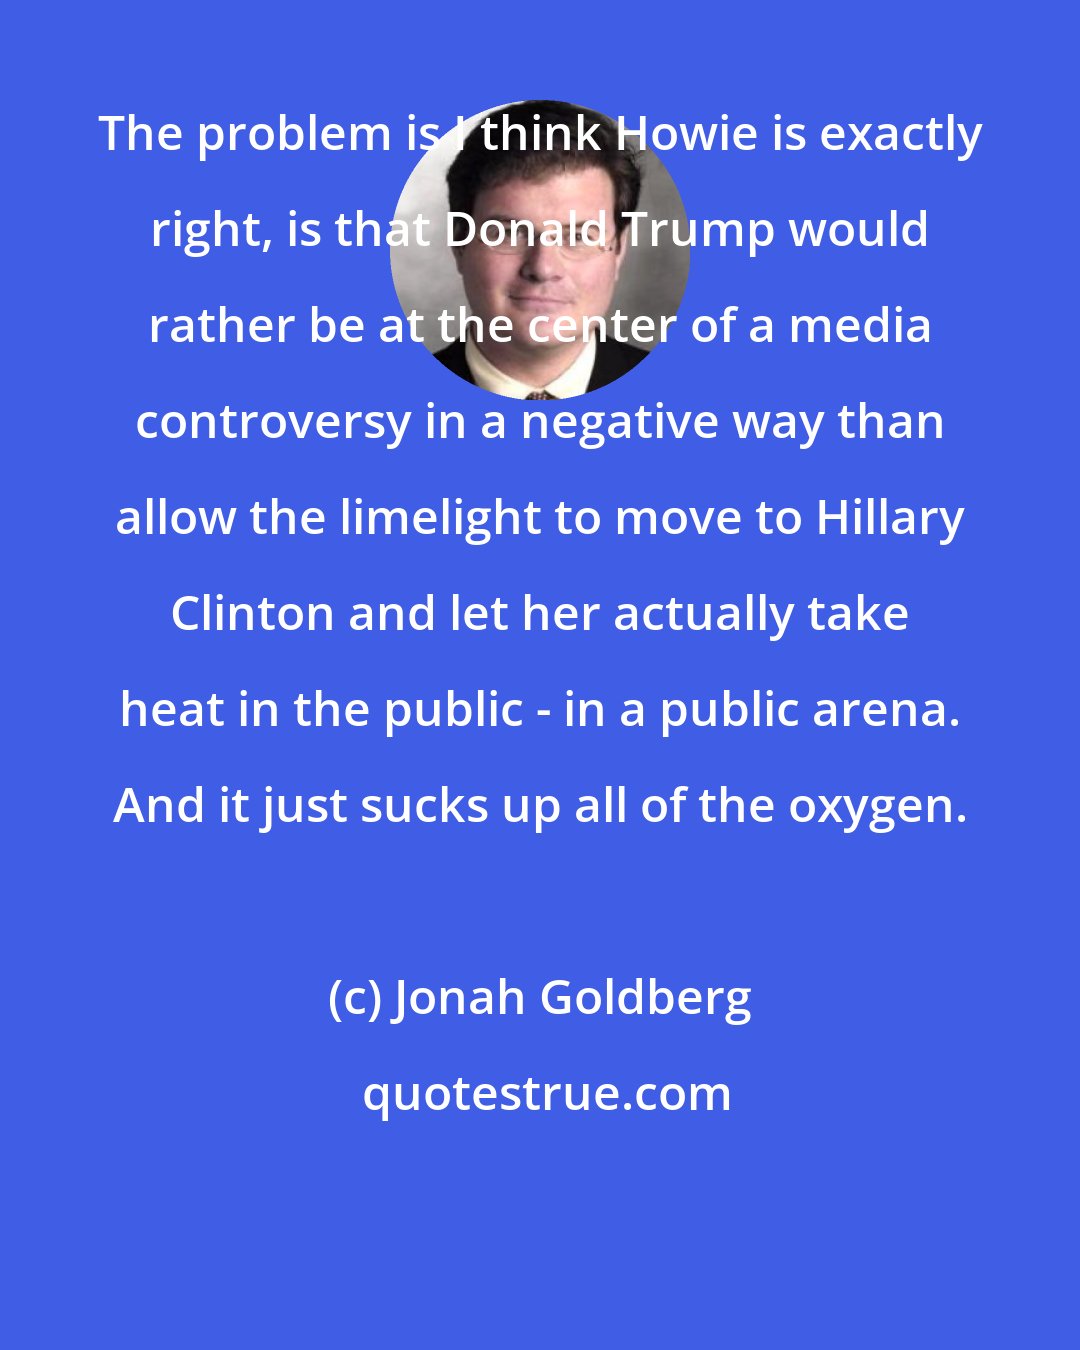 Jonah Goldberg: The problem is I think Howie is exactly right, is that Donald Trump would rather be at the center of a media controversy in a negative way than allow the limelight to move to Hillary Clinton and let her actually take heat in the public - in a public arena. And it just sucks up all of the oxygen.